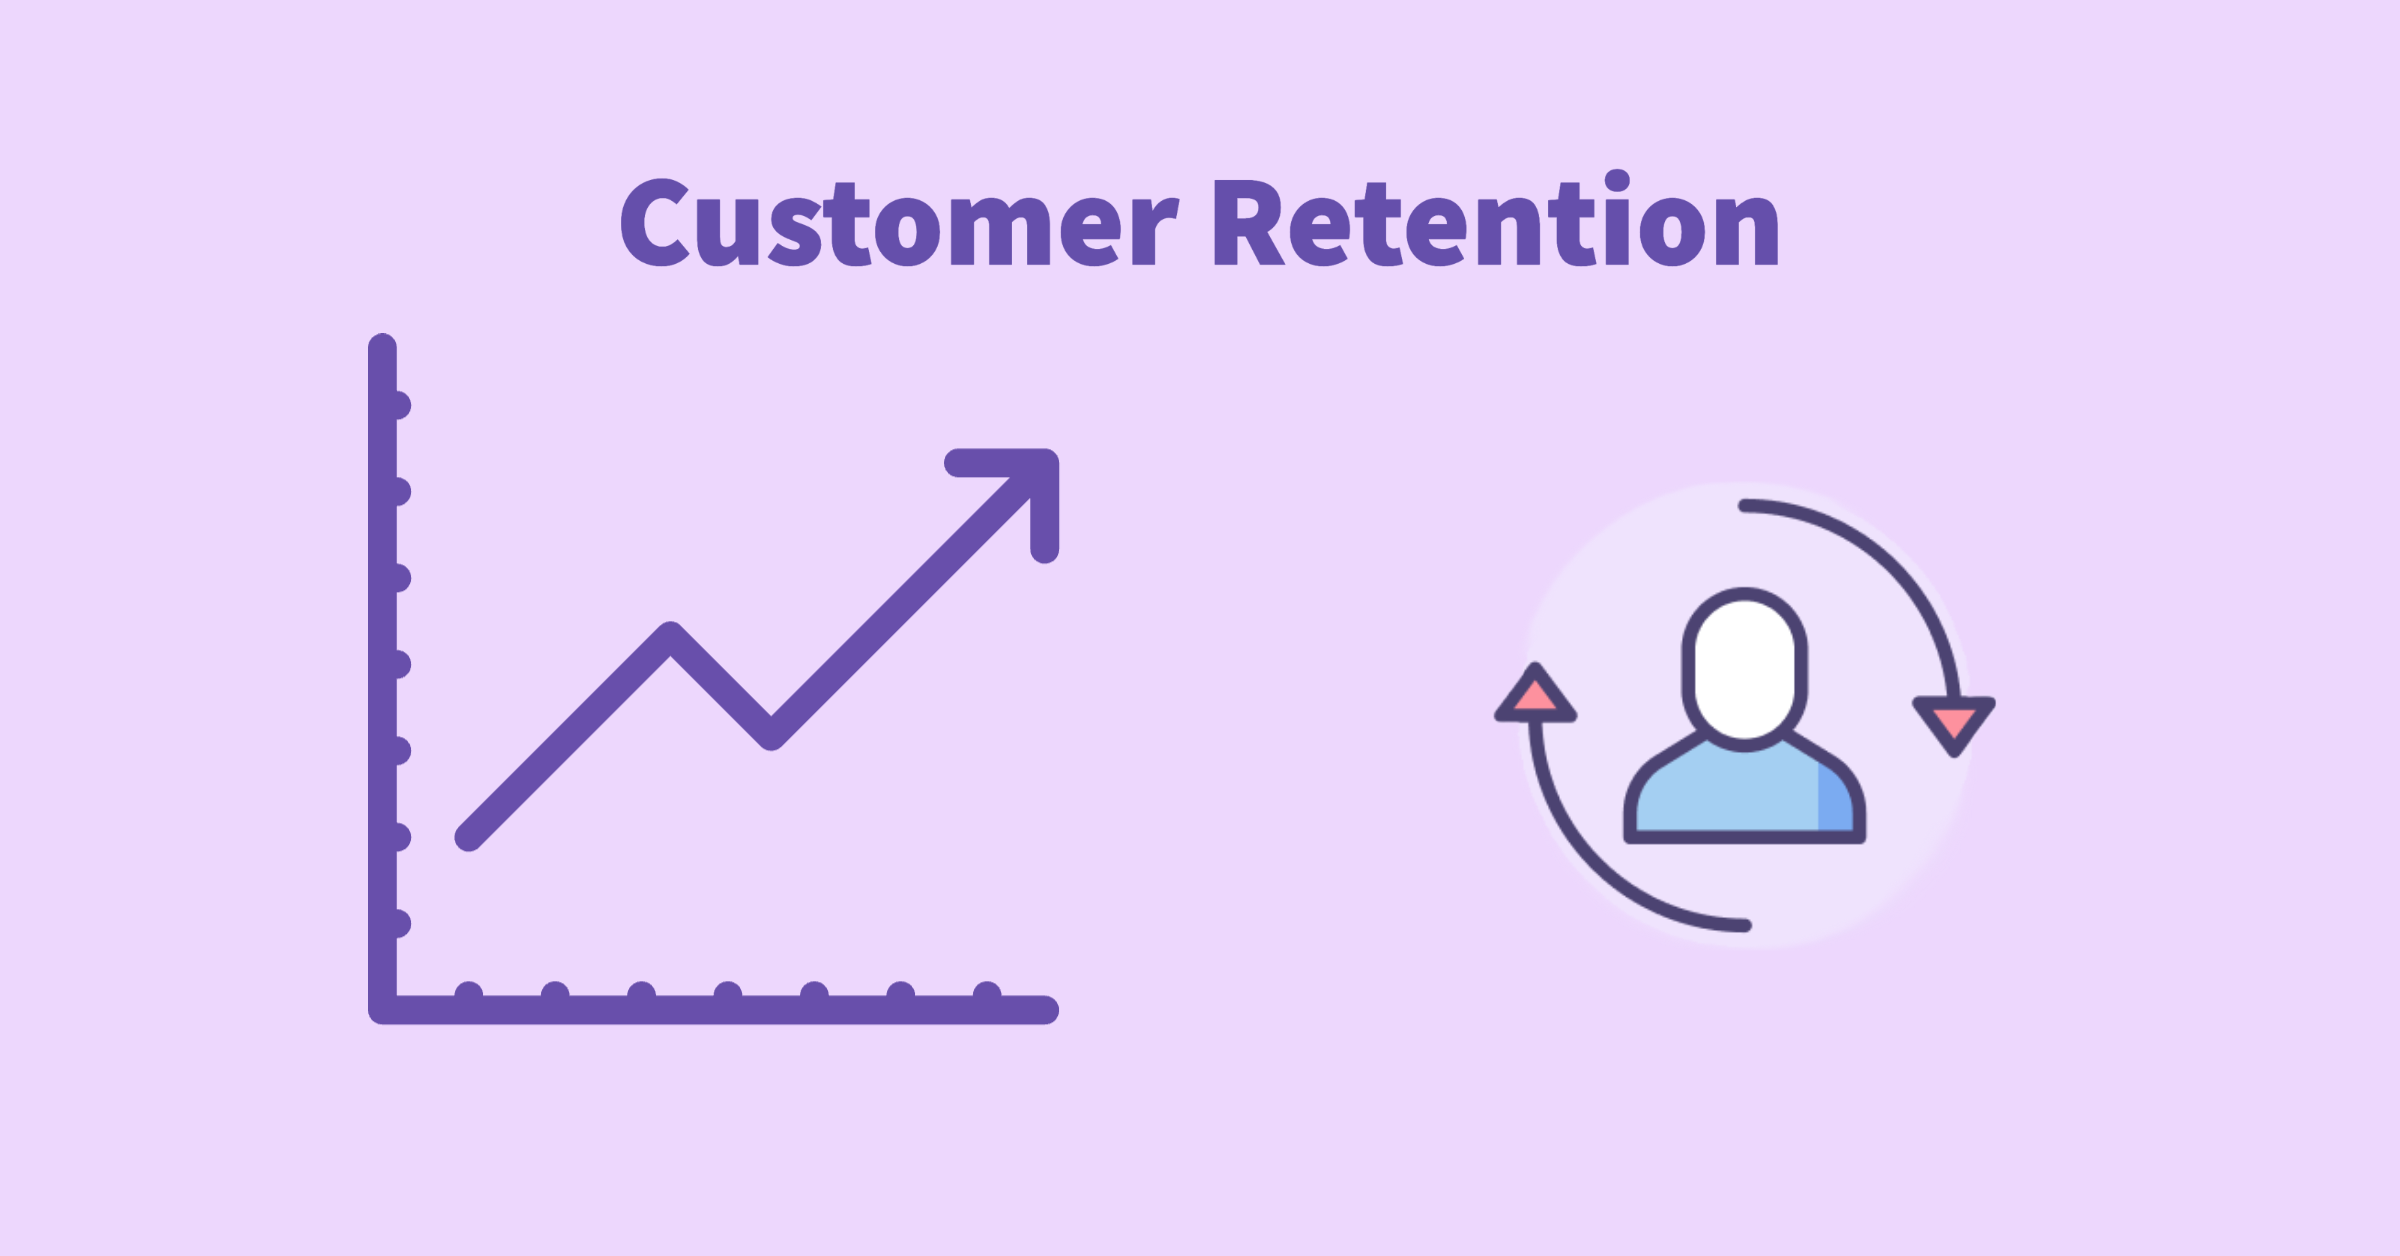 Strategies to increase Customer Retention cover